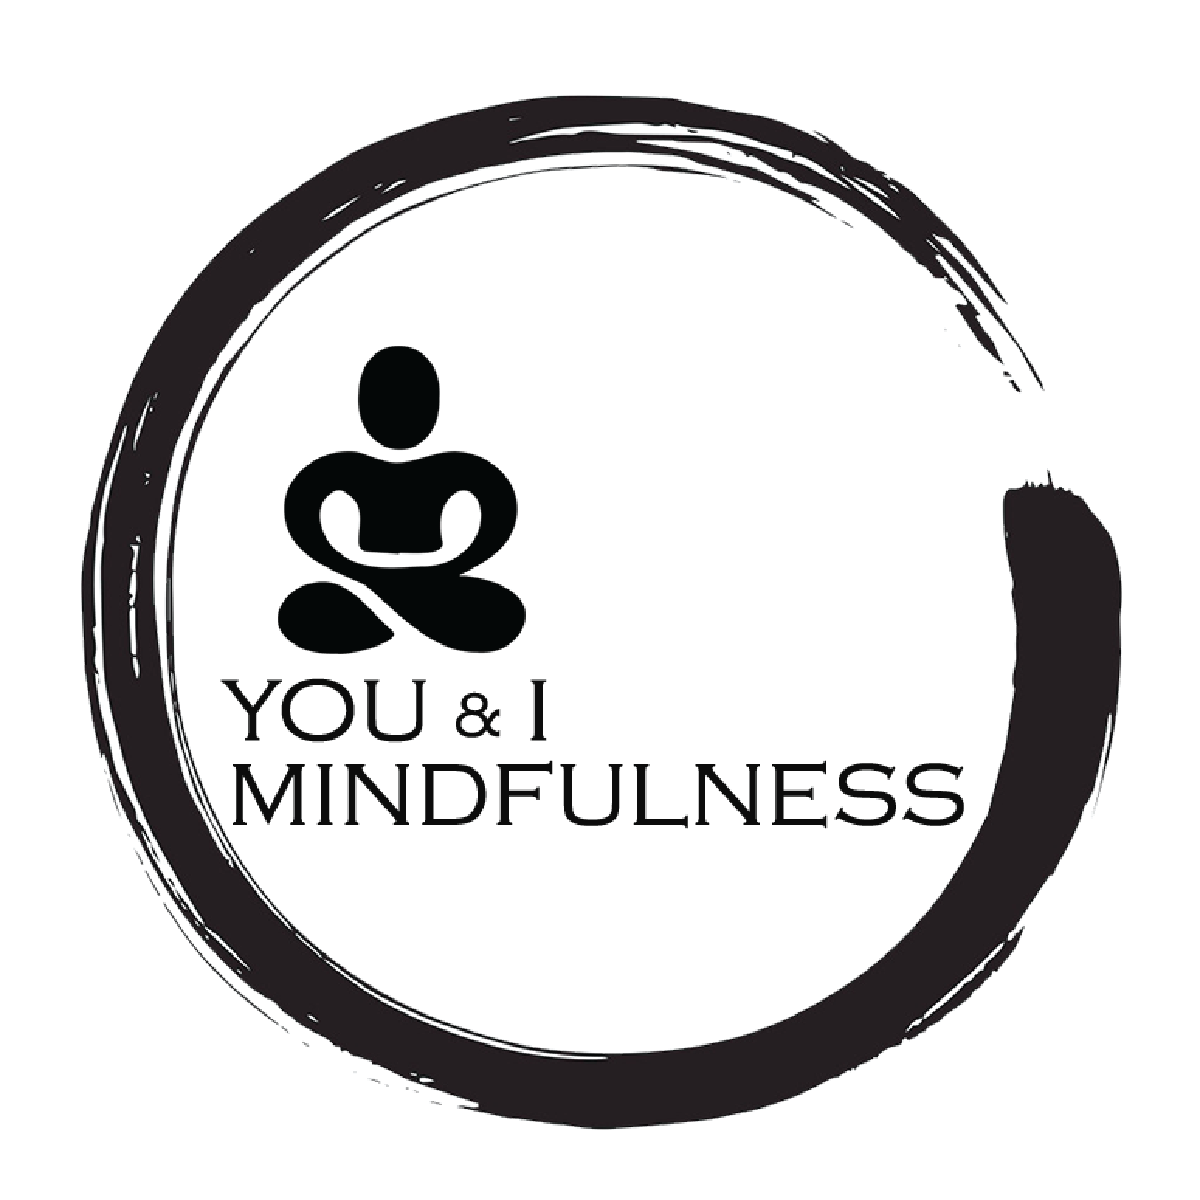 UI Mind is a campus mindfulness group run by Dr. Jamie Derrick